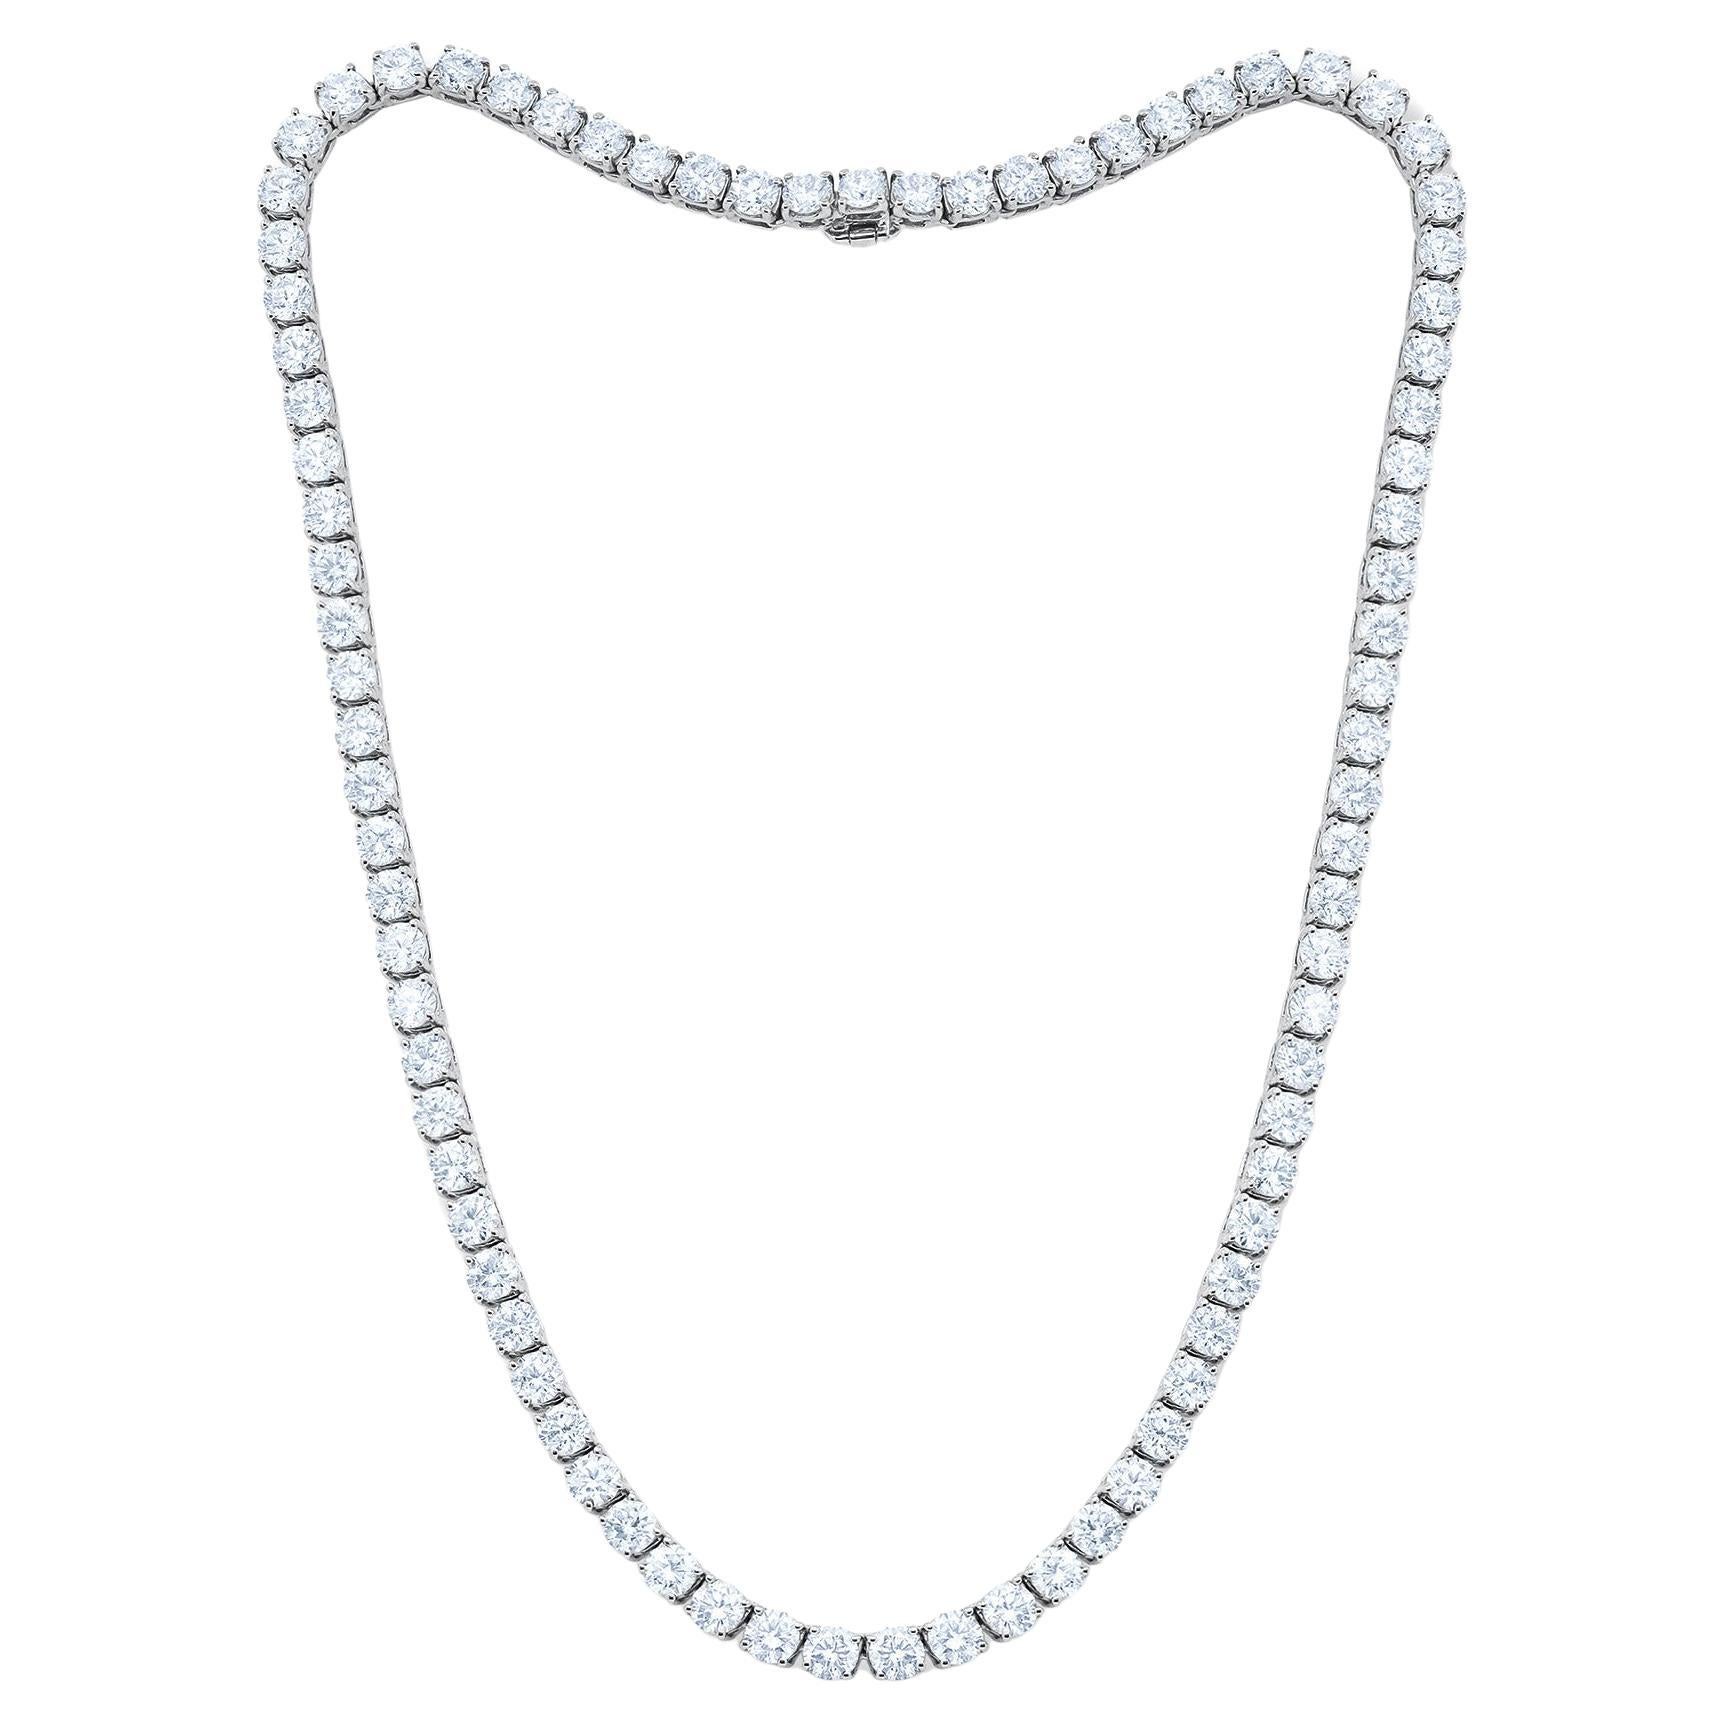 Diana M. 18 kt white gold, 16" 4 prong diamond tennis necklace featuring 28.40  For Sale